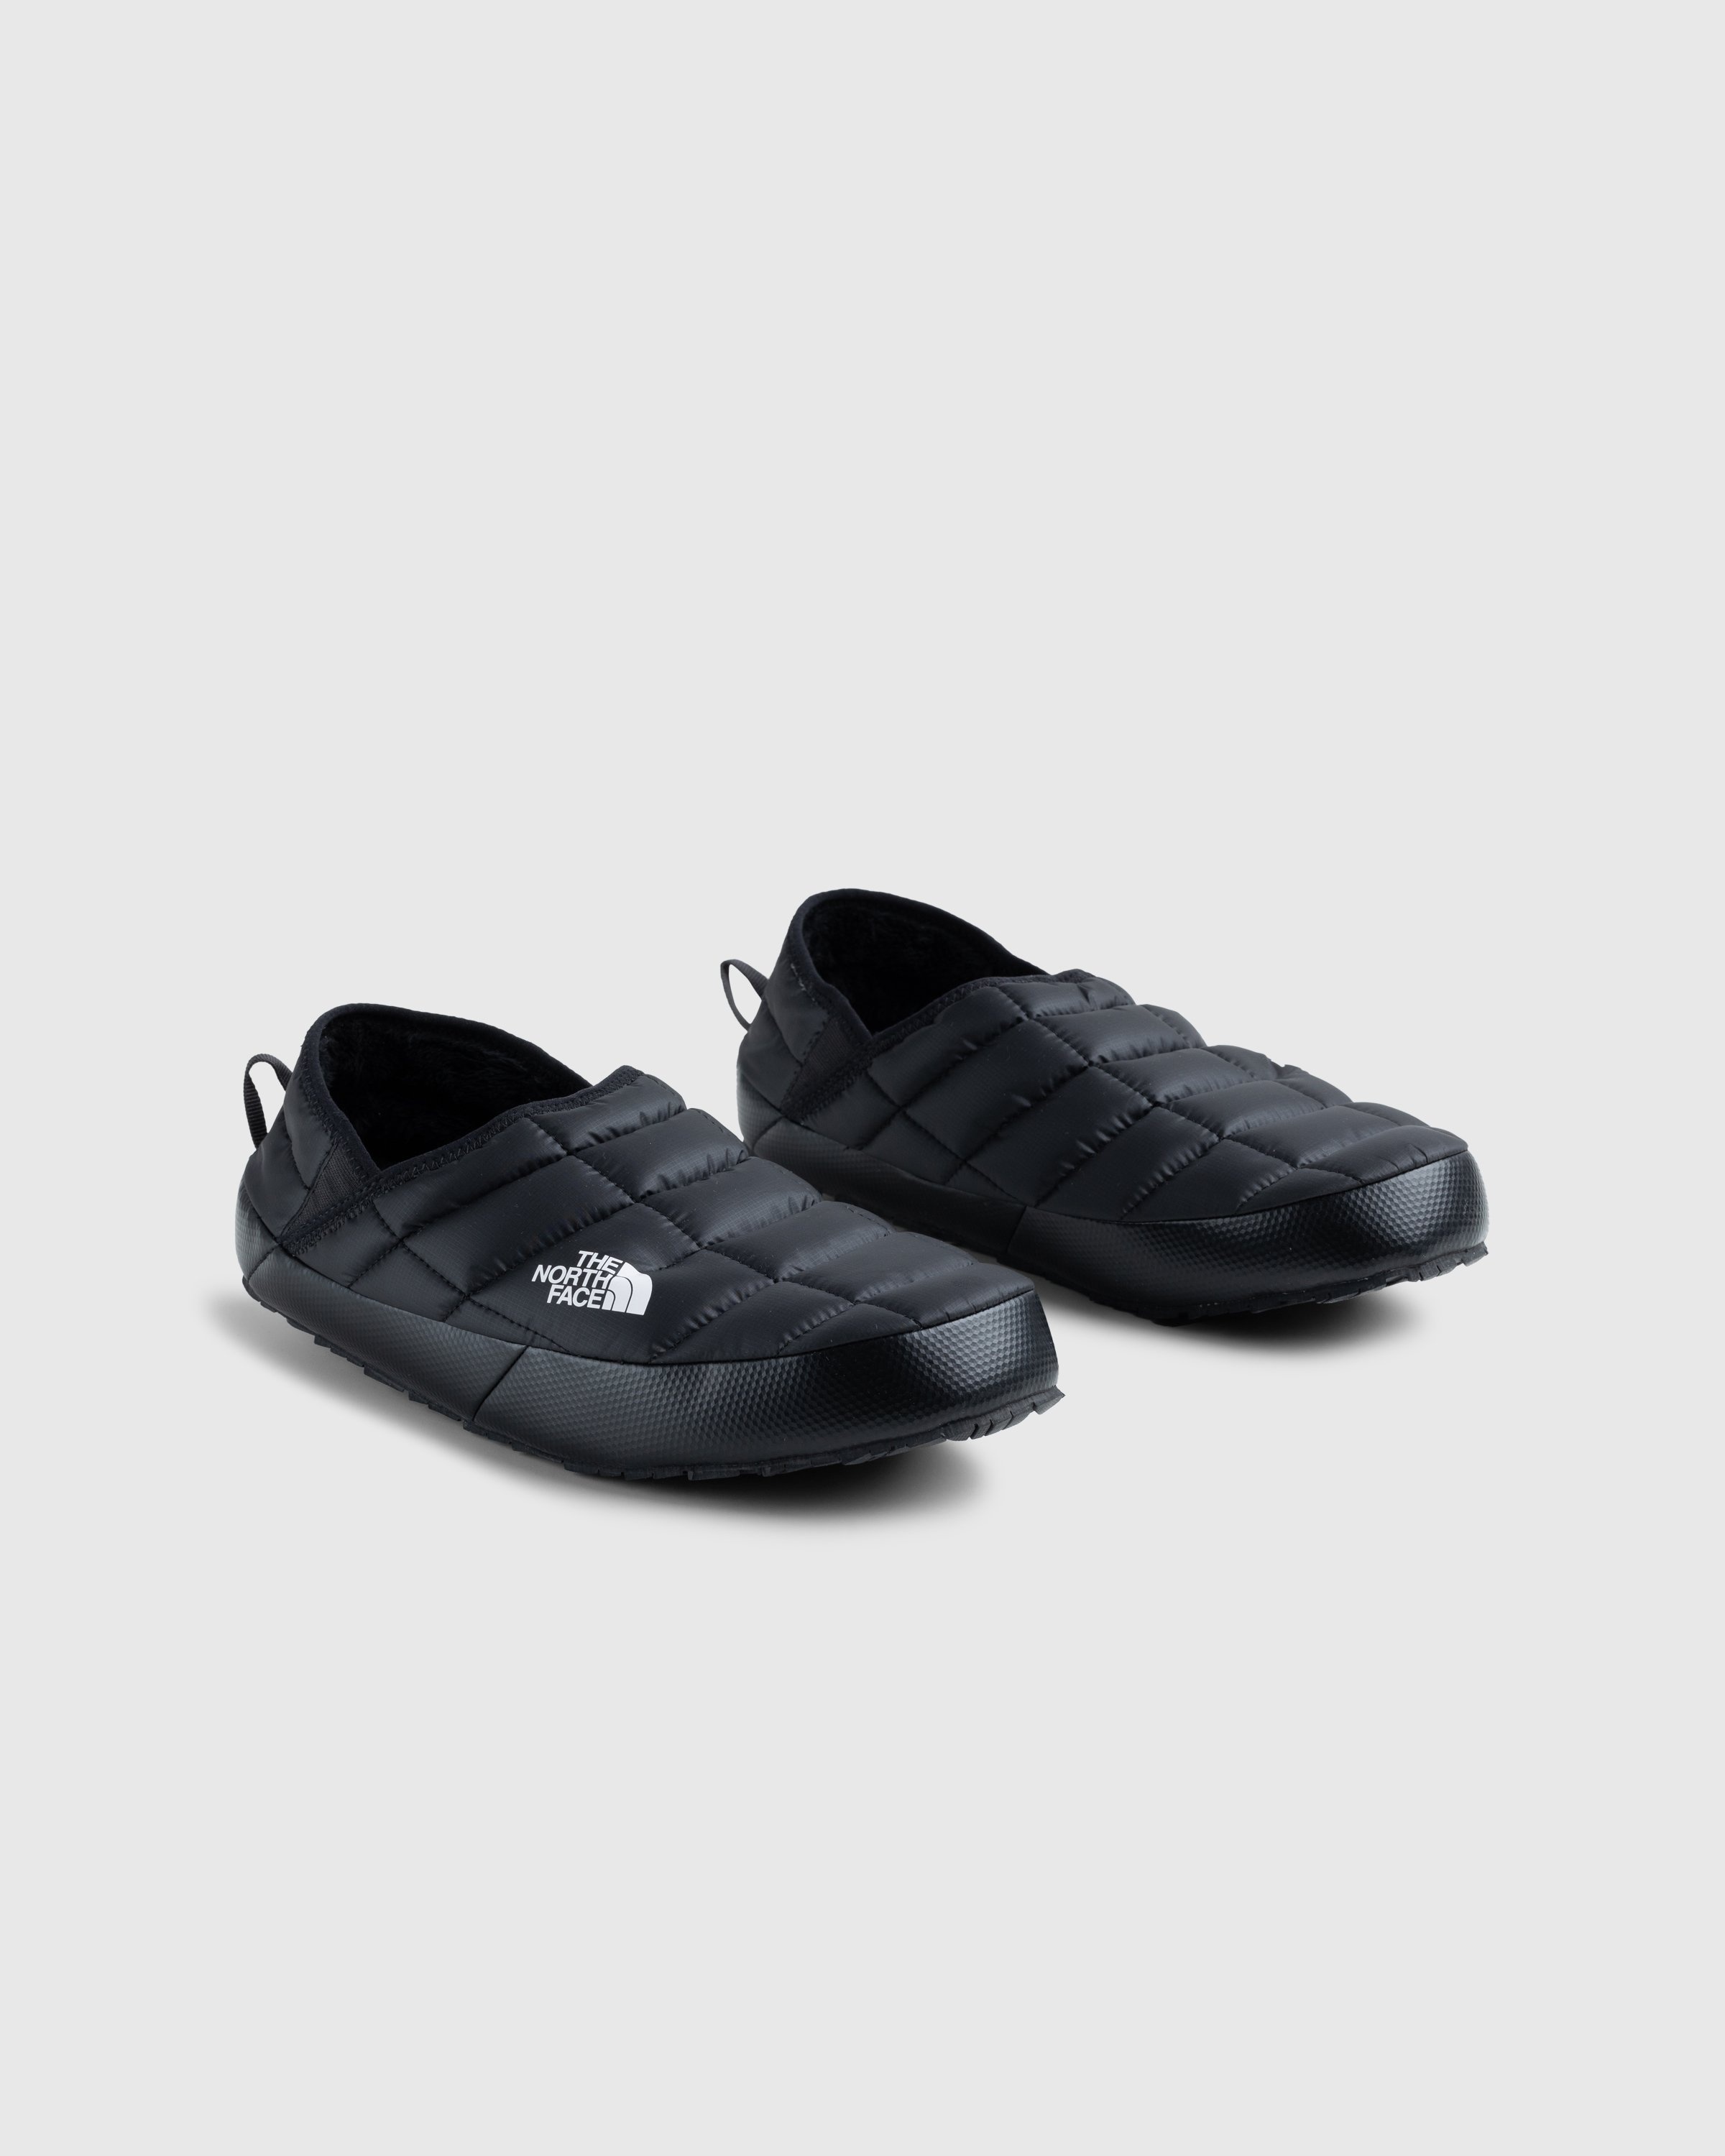 The North Face – ThermoBall Traction Mules V TNF Black/White - Sandals & Slides - Black - Image 3